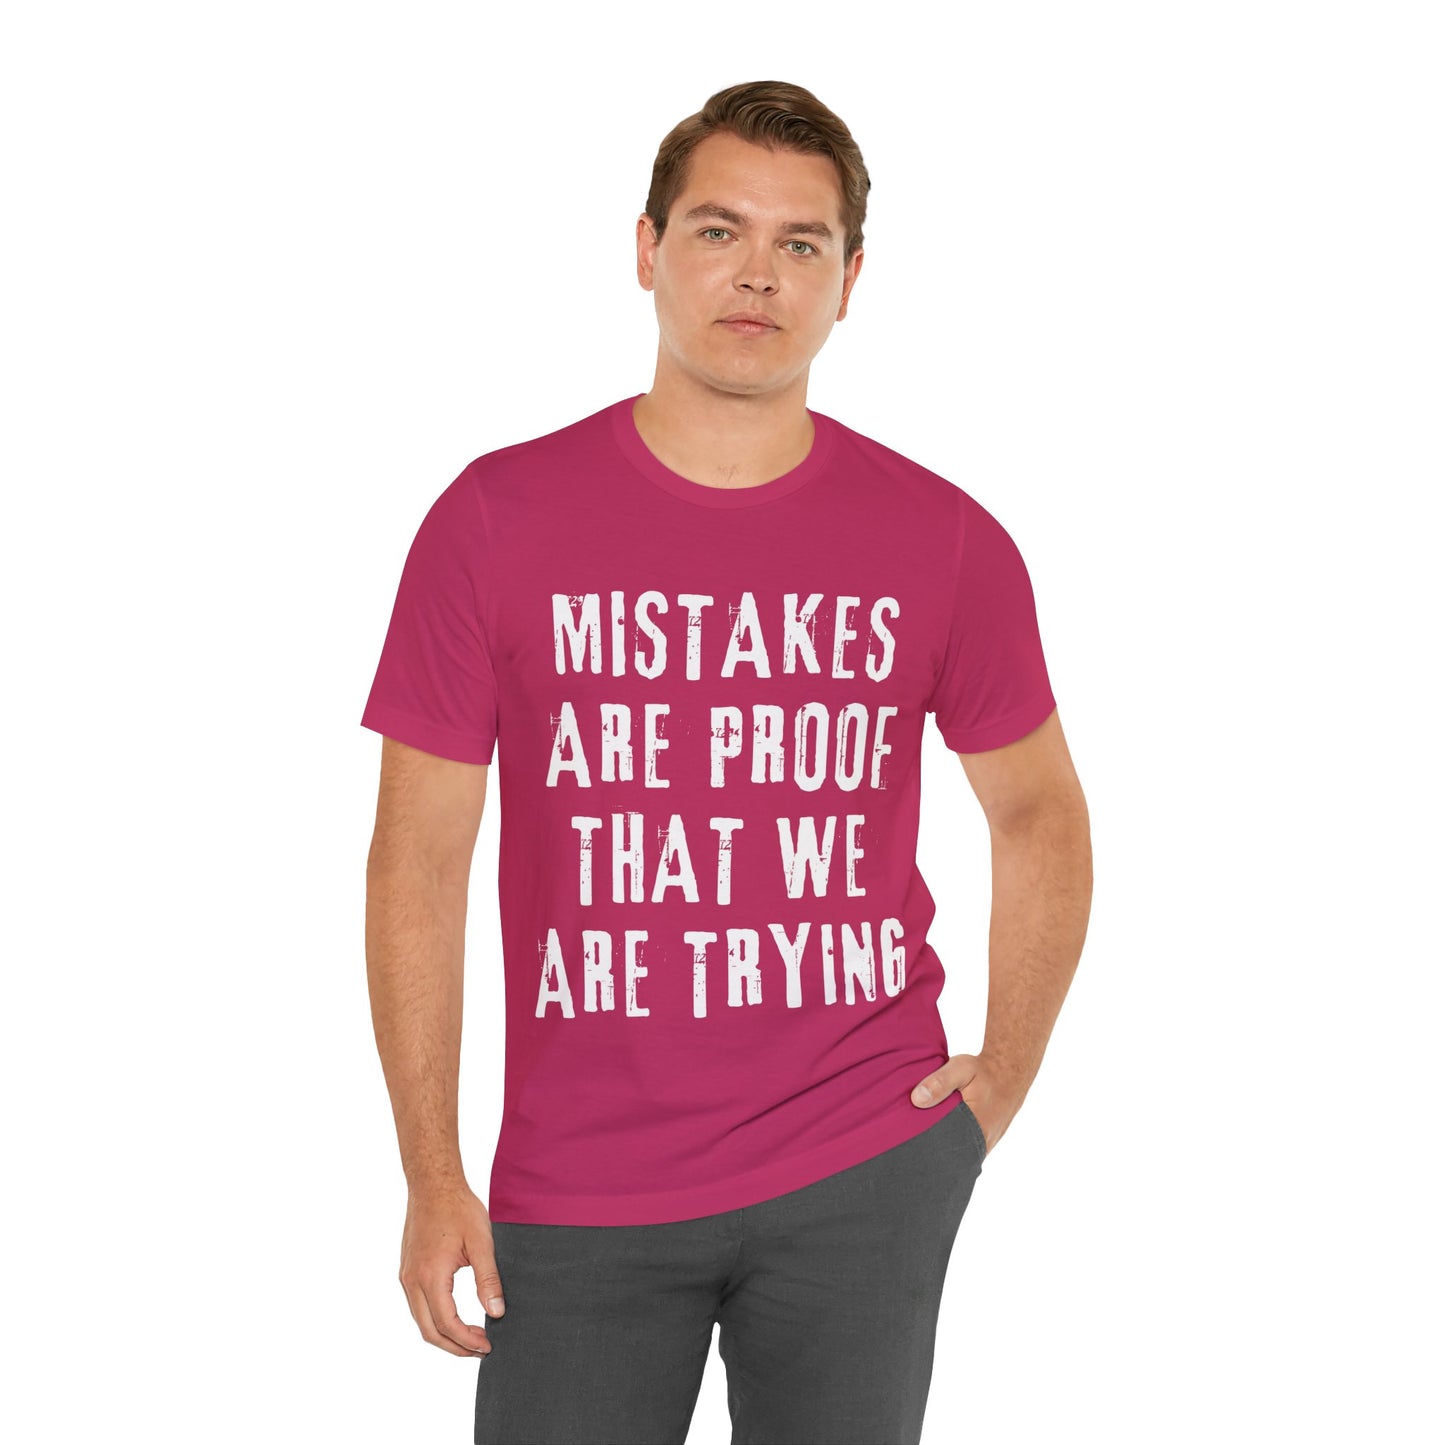 Mistakes are proof T-shirt - Dark Colors